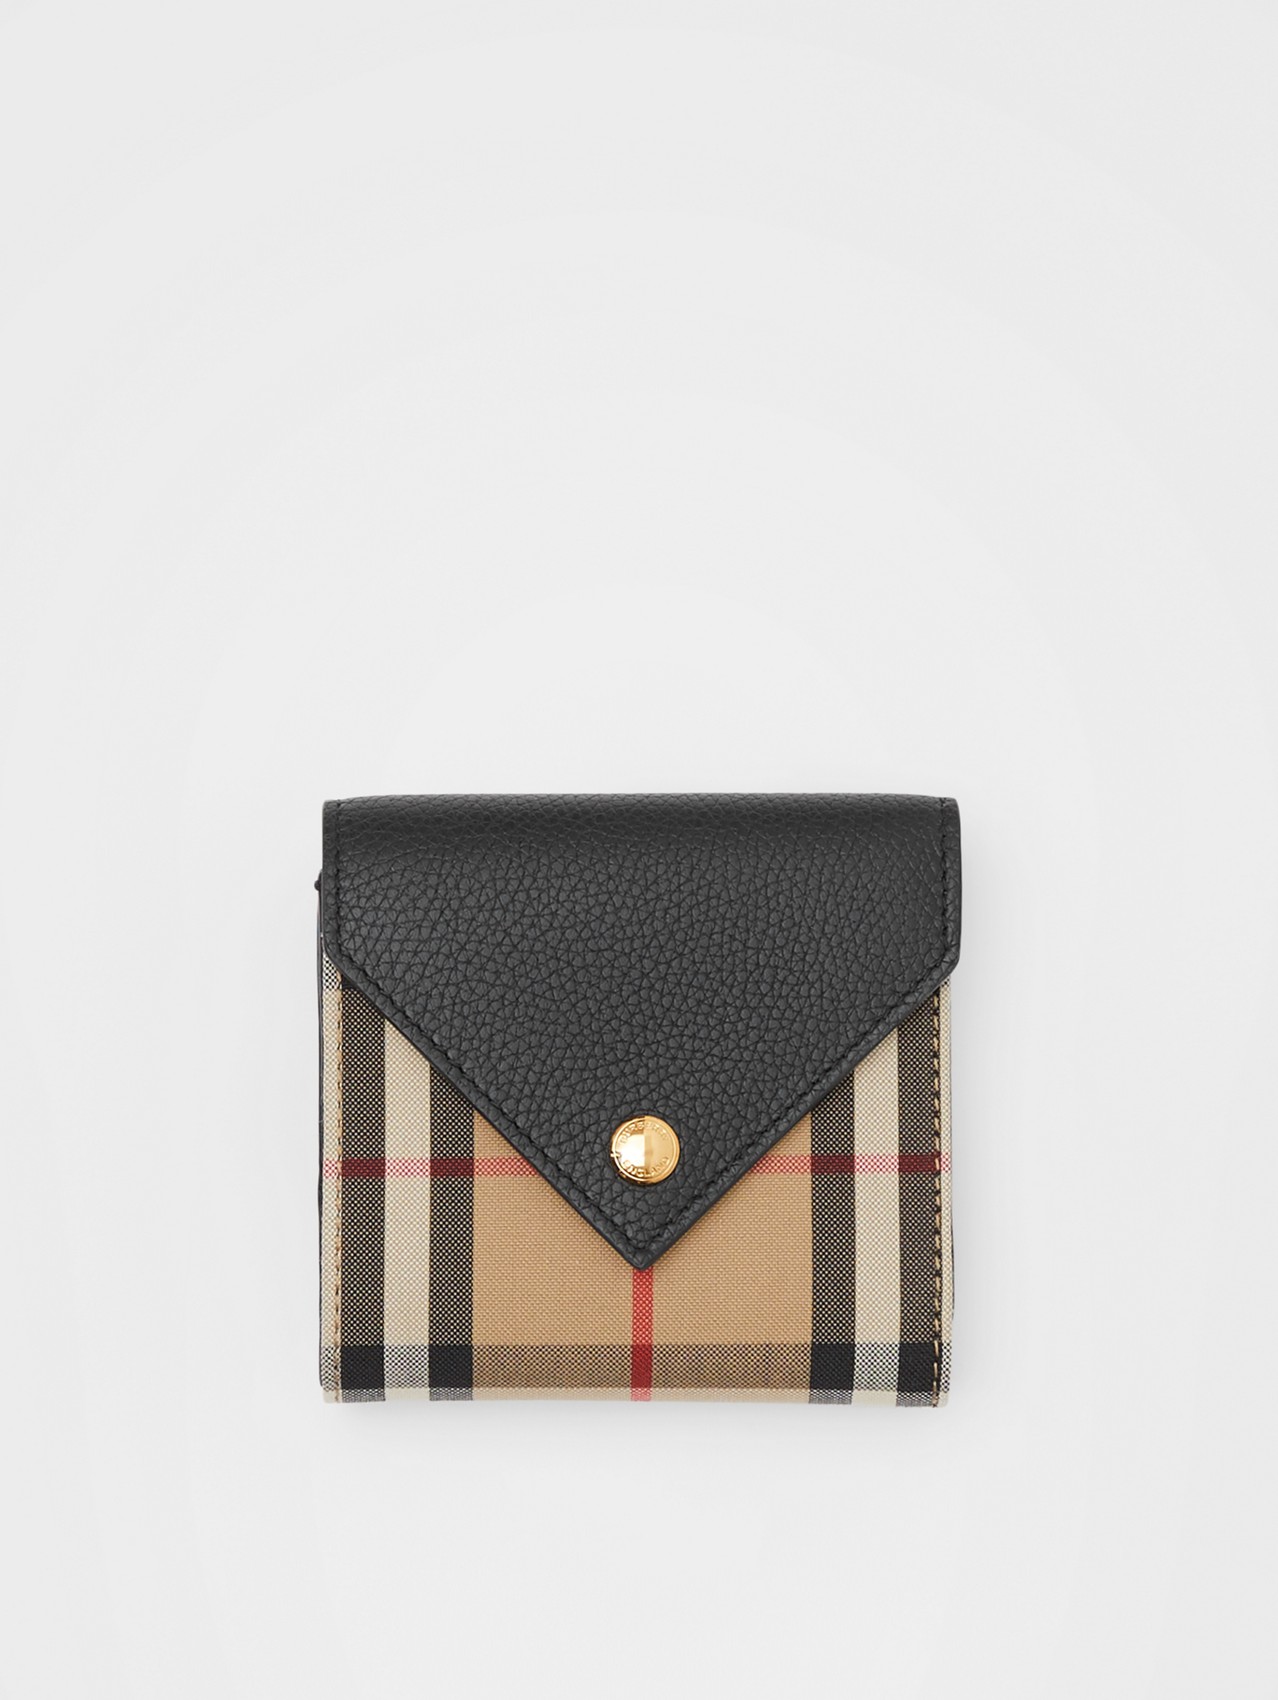 Vintage Check and Grainy Leather Folding Wallet in Black